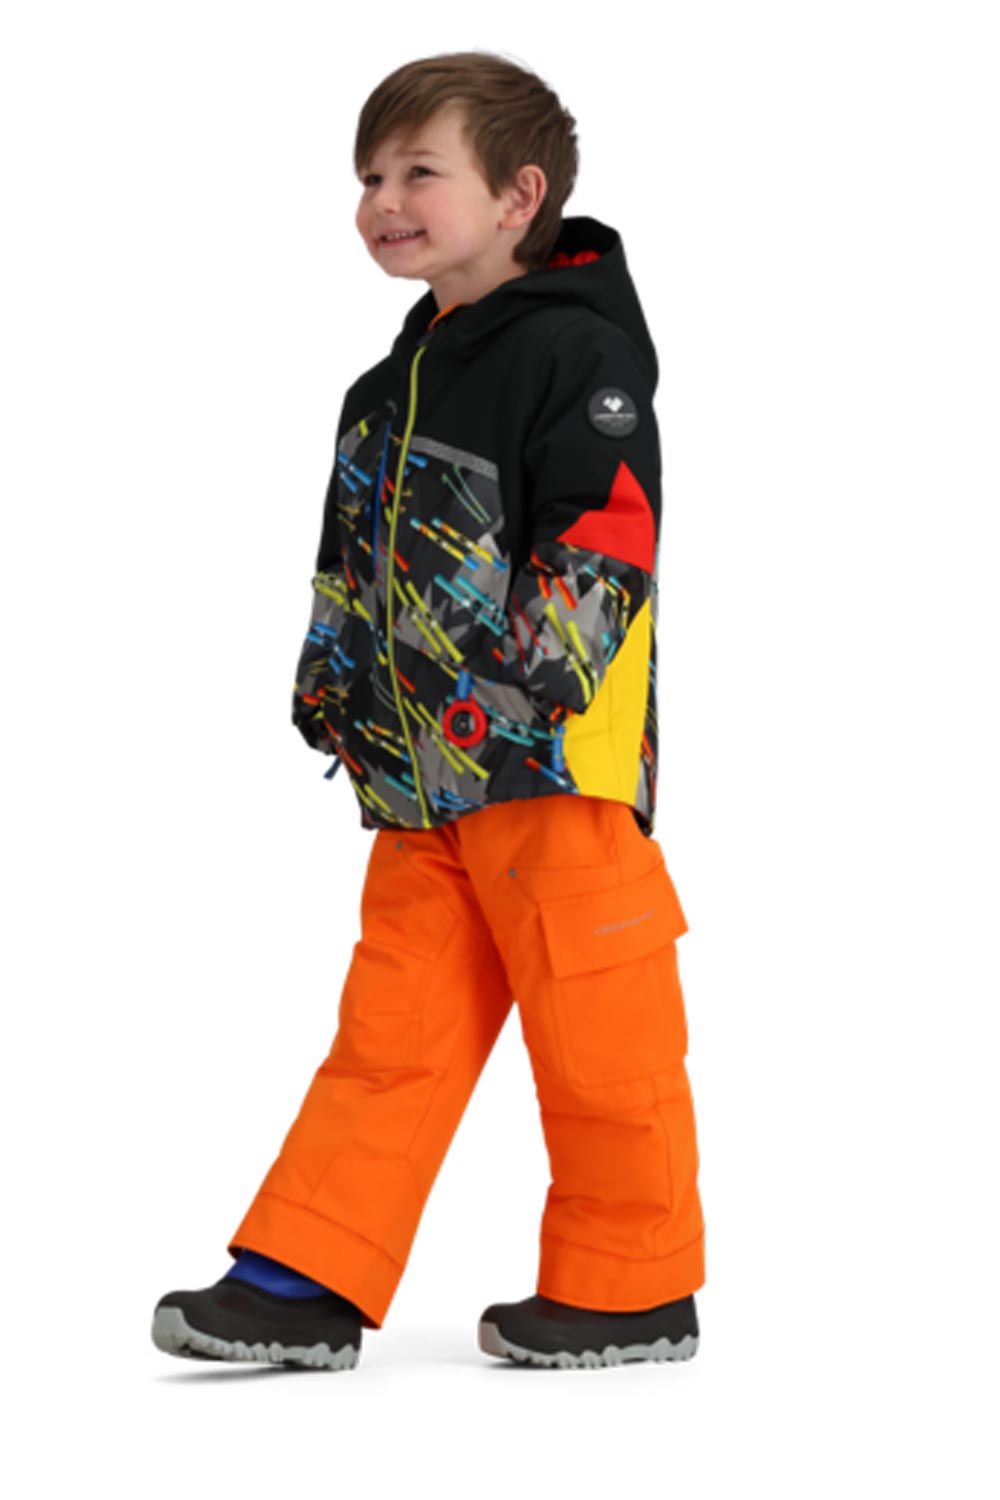 Boys' Obermeyer Orb jacket, black with skis graphic